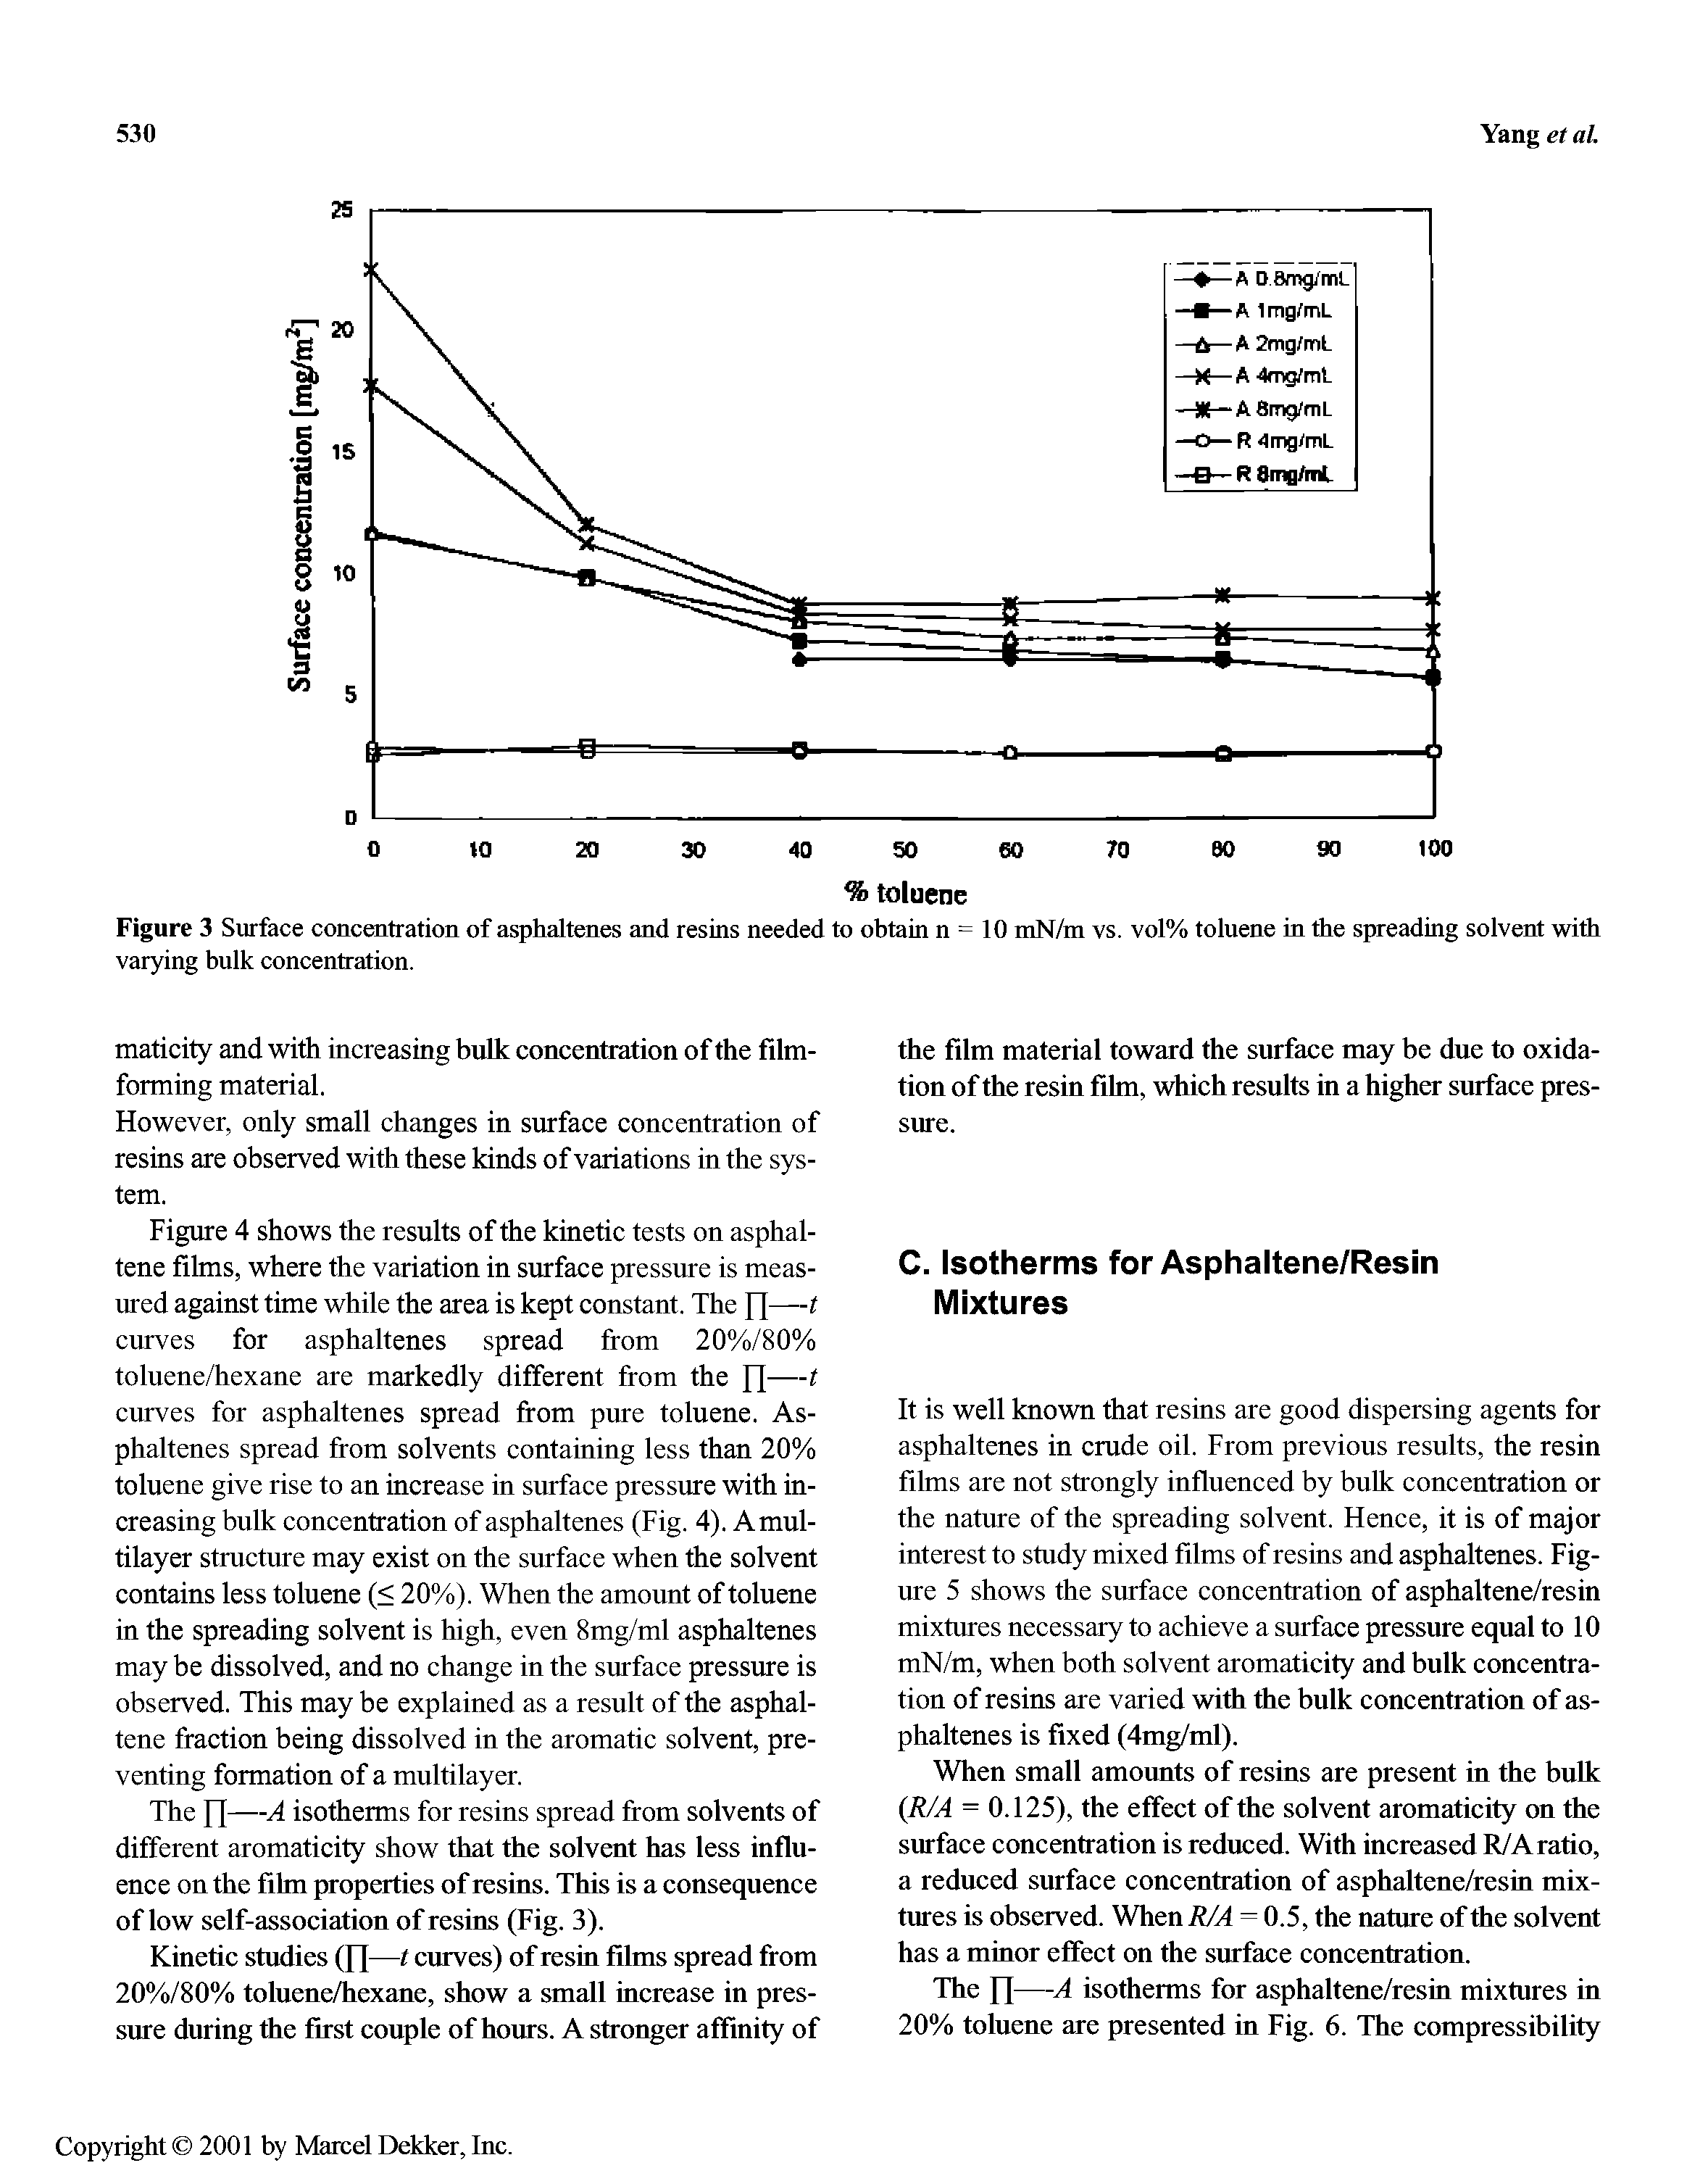 Figure 4 shows the results of the kinetic tests on asphaltene films, where the variation in surface pressure is measured against time while the area is kept constant. The f]—t curves for asphaltenes spread from 20%/80% toluene/hexane are markedly different from the H— curves for asphaltenes spread from pure toluene. Asphaltenes spread from solvents containing less than 20% toluene give rise to an increase in surface pressure with increasing bulk concentration of asphaltenes (Fig. 4). Amul-tilayer structure may exist on the surface when the solvent contains less toluene (< 20%). When the amount of toluene in the spreading solvent is high, even 8mg/ml asphaltenes may be dissolved, and no change in the surface pressure is observed. This may be explained as a result of the asphaltene fraction being dissolved in the aromatic solvent, preventing formation of a multilayer.